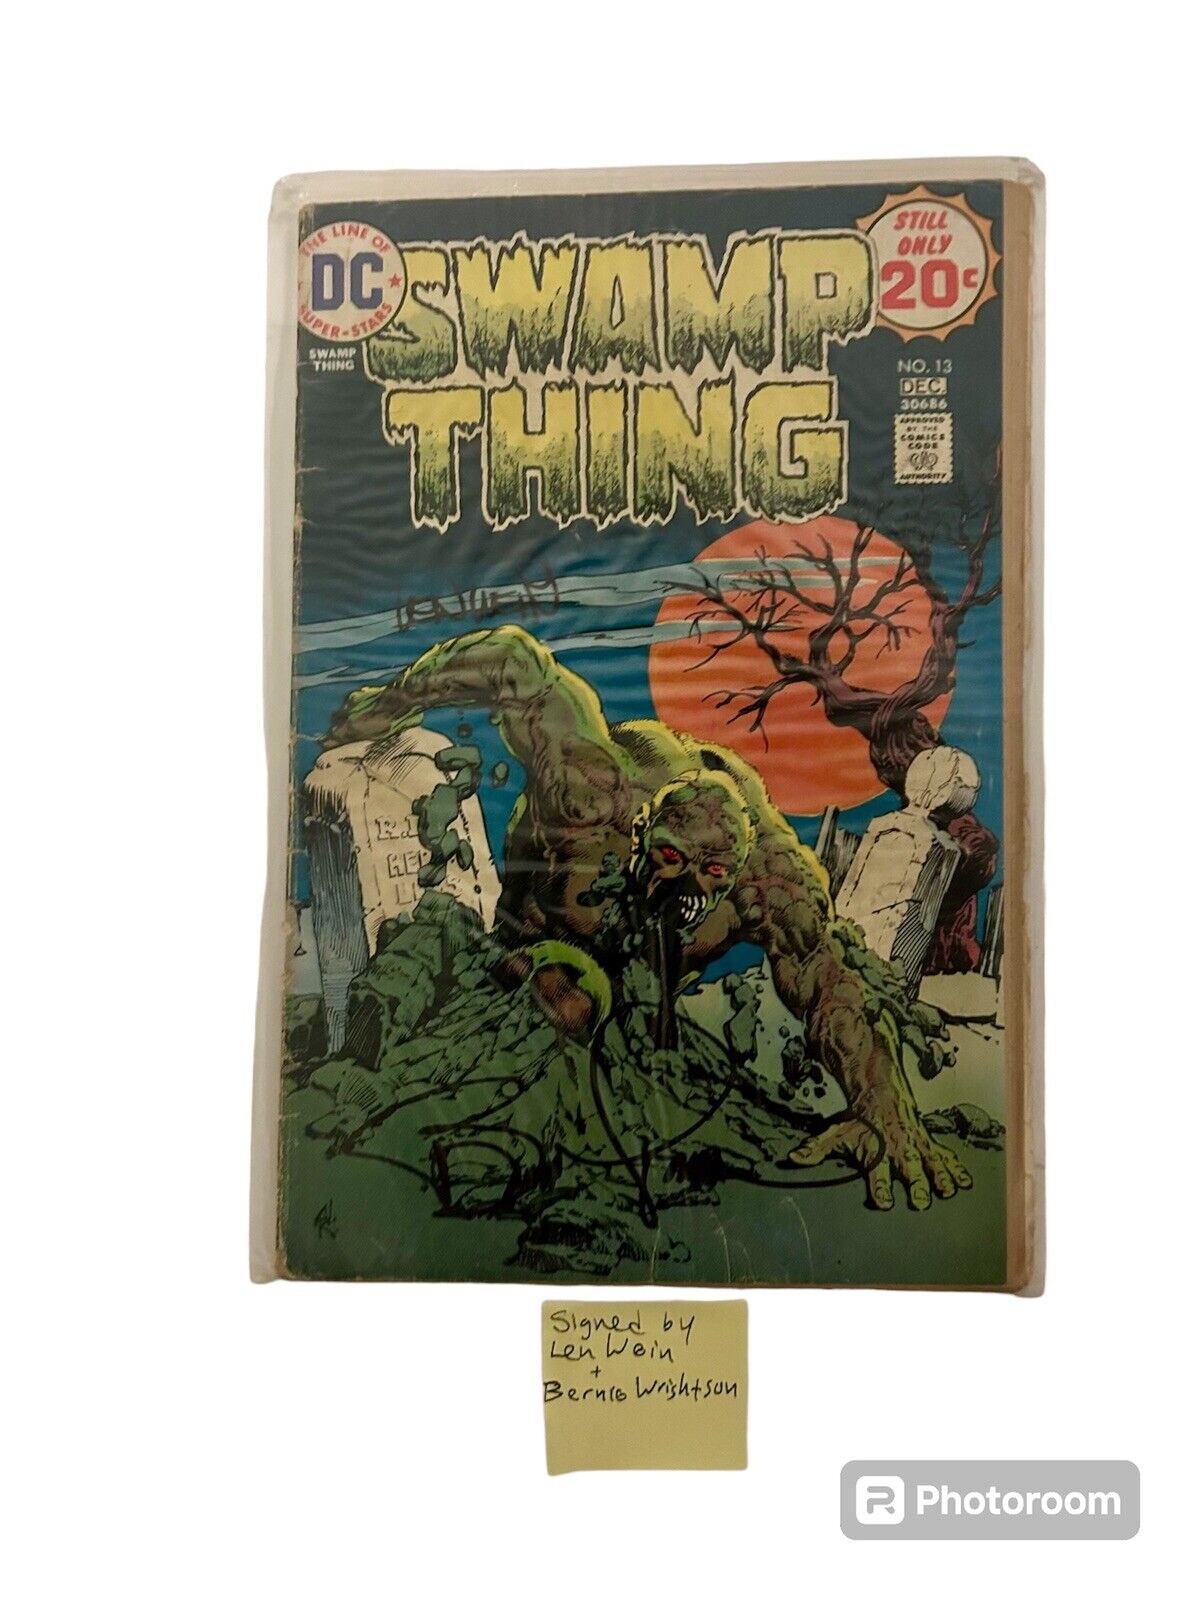 Swamp Thing #13 DEC 1974 Origin Retold Signed By Len Wein And Bernie Wrightson